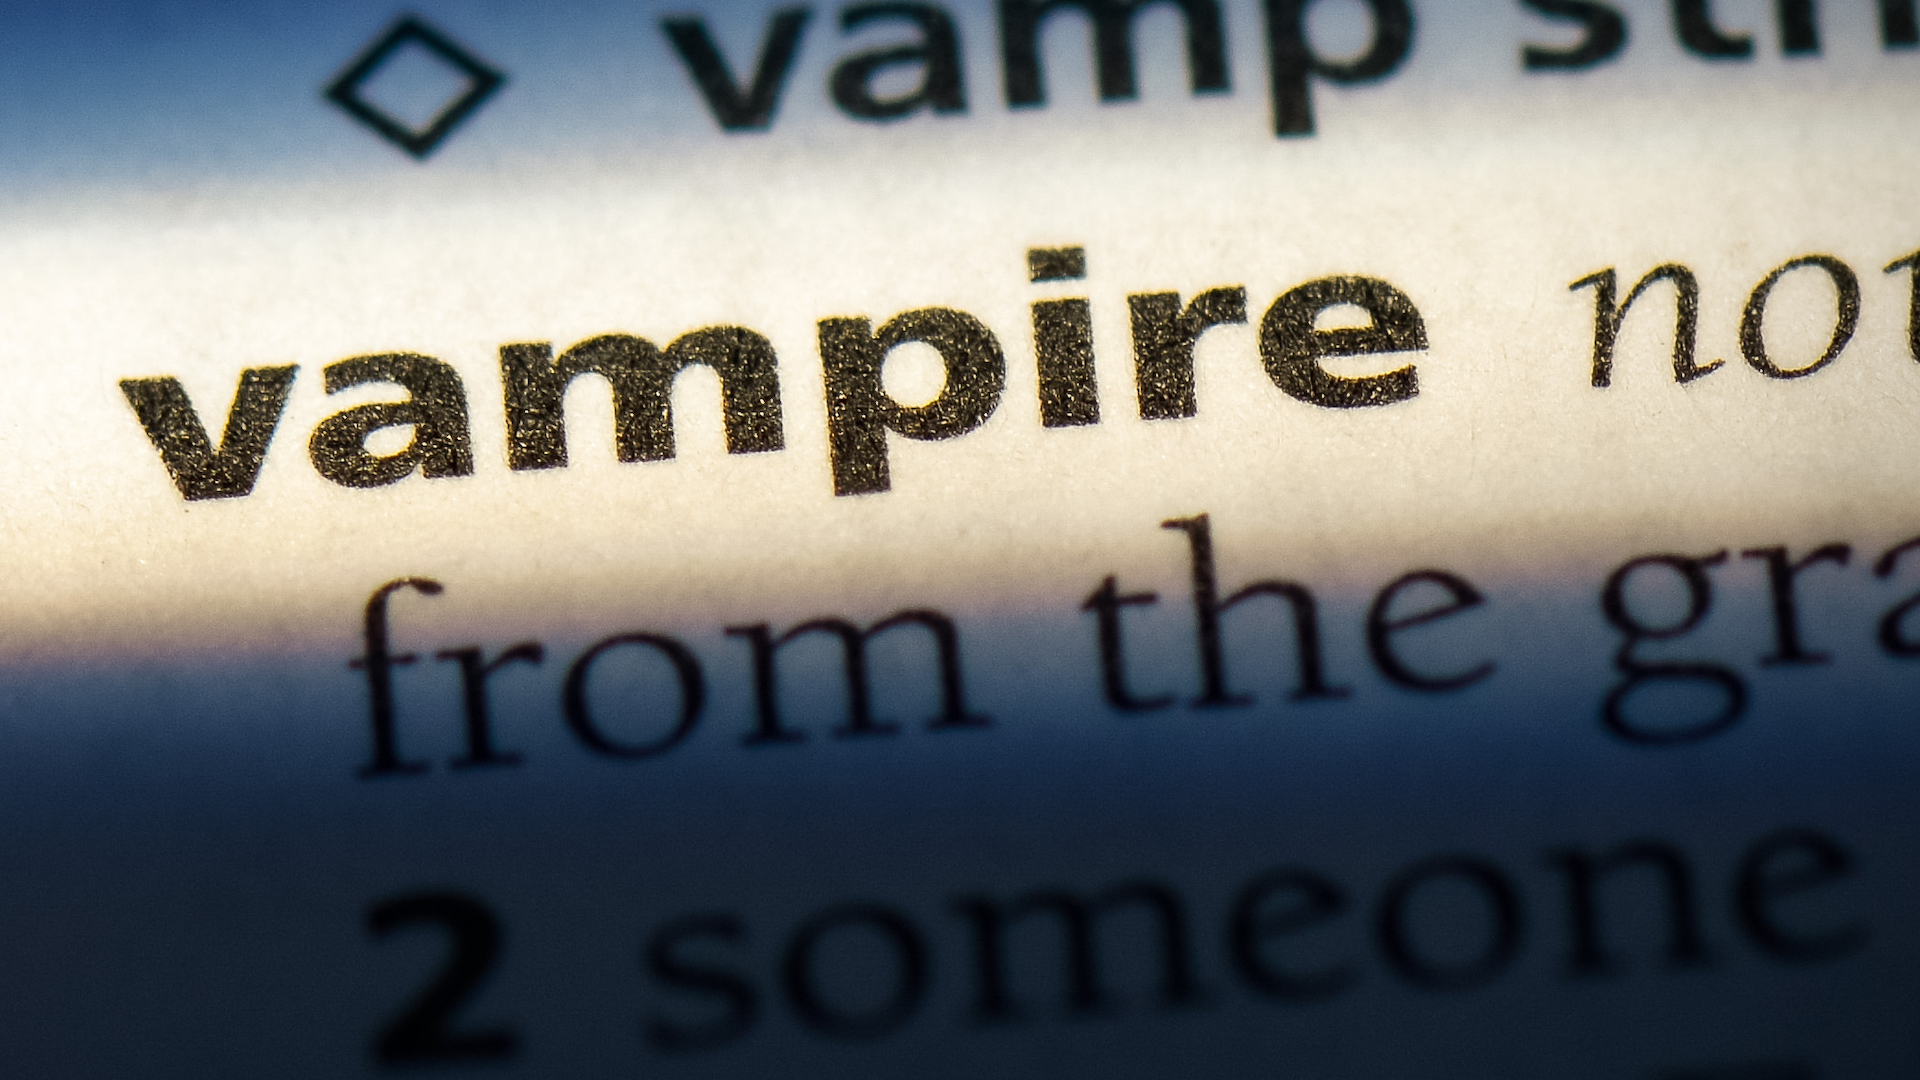 Vampire in the dictionary